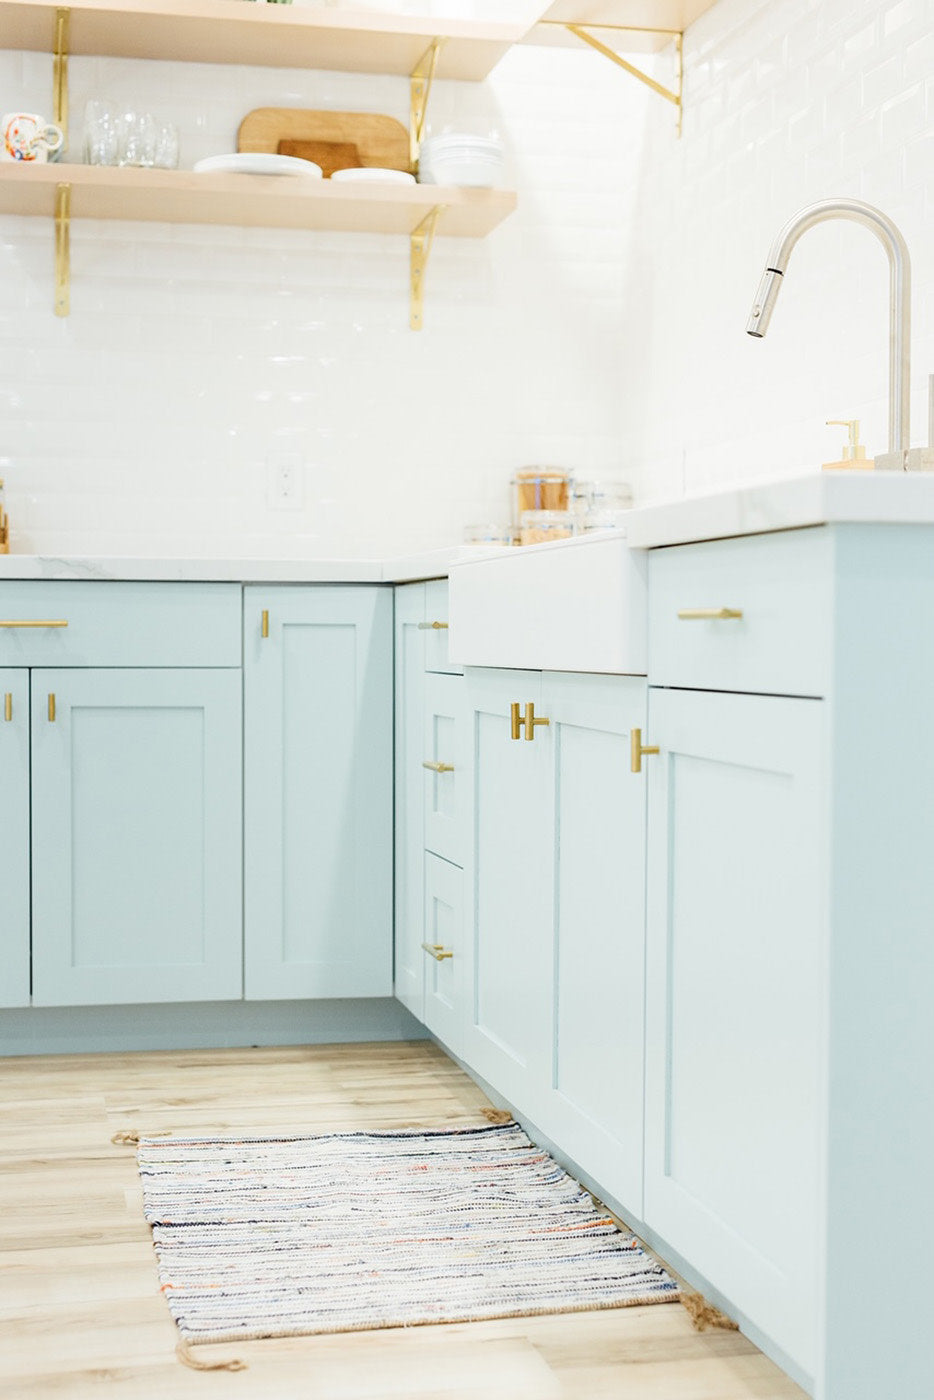 How to Choose Kitchen Cabinet Paint Colors